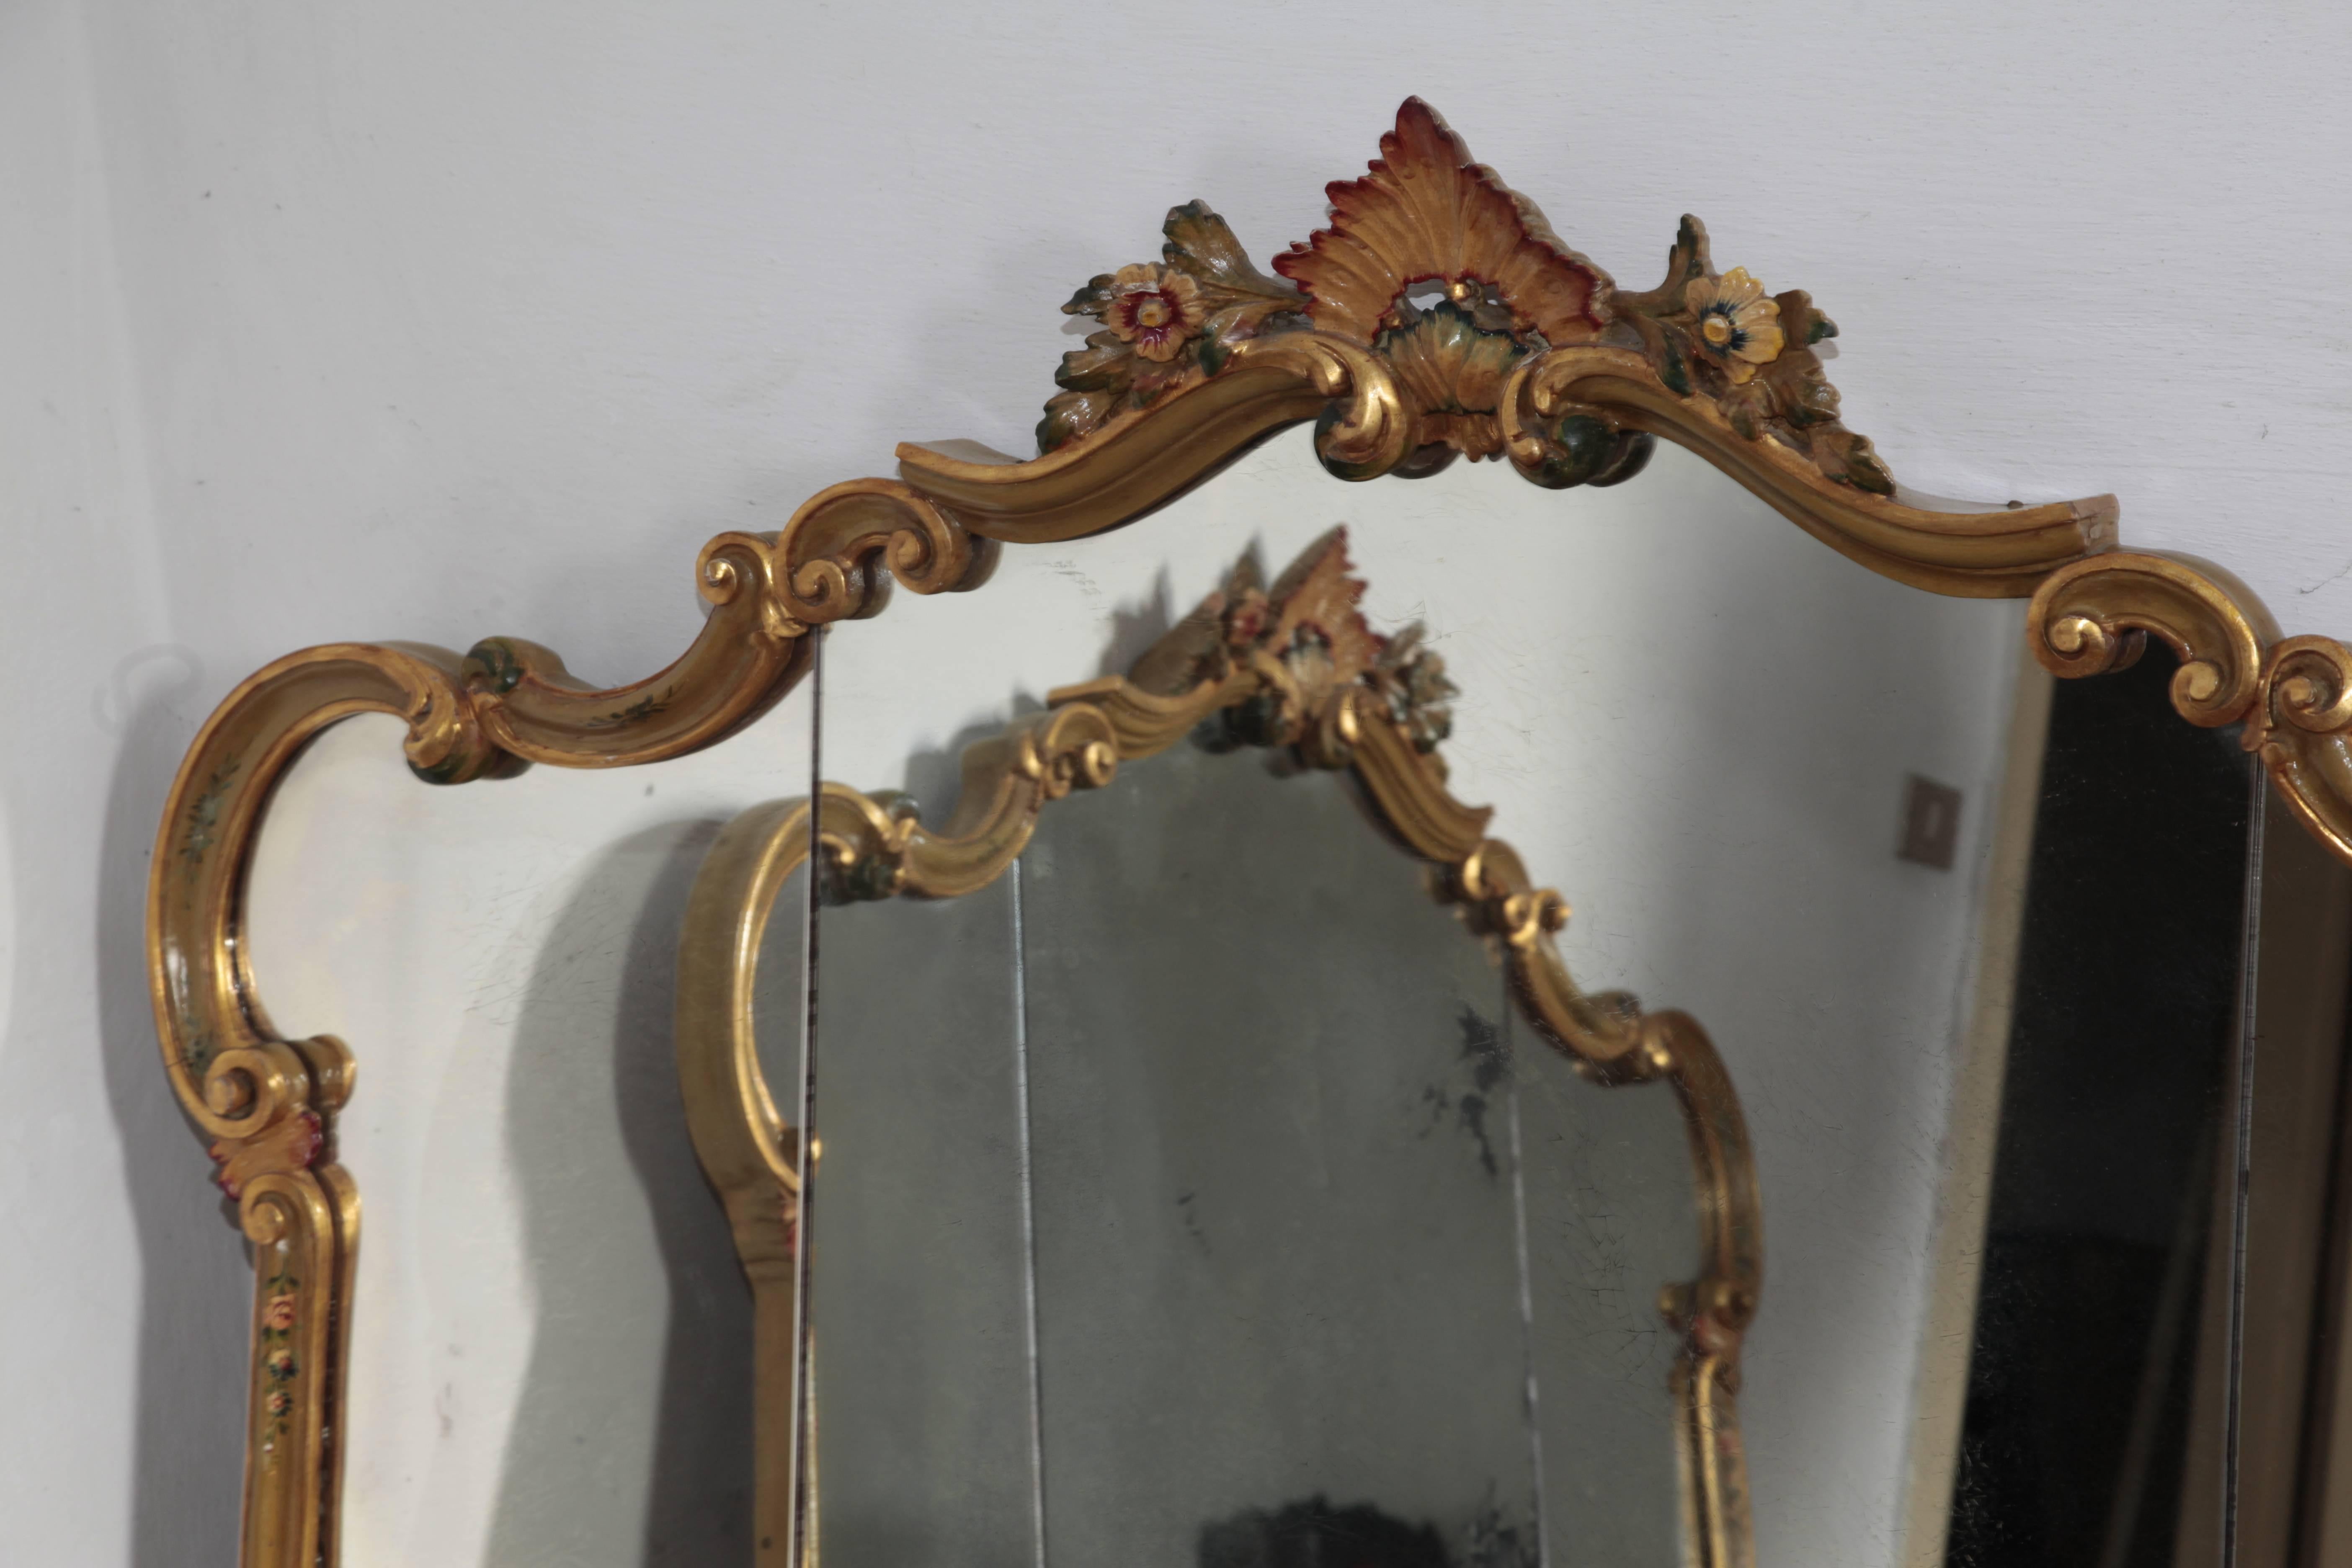 1920s original Venetian mirror, part of a larger collection consisting of a bed, armchairs, dining chairs, table, wardrobe, valet and vanity. These pieces have been sitting in an old villa in Veneto, and are on their original state. 

One mirror is